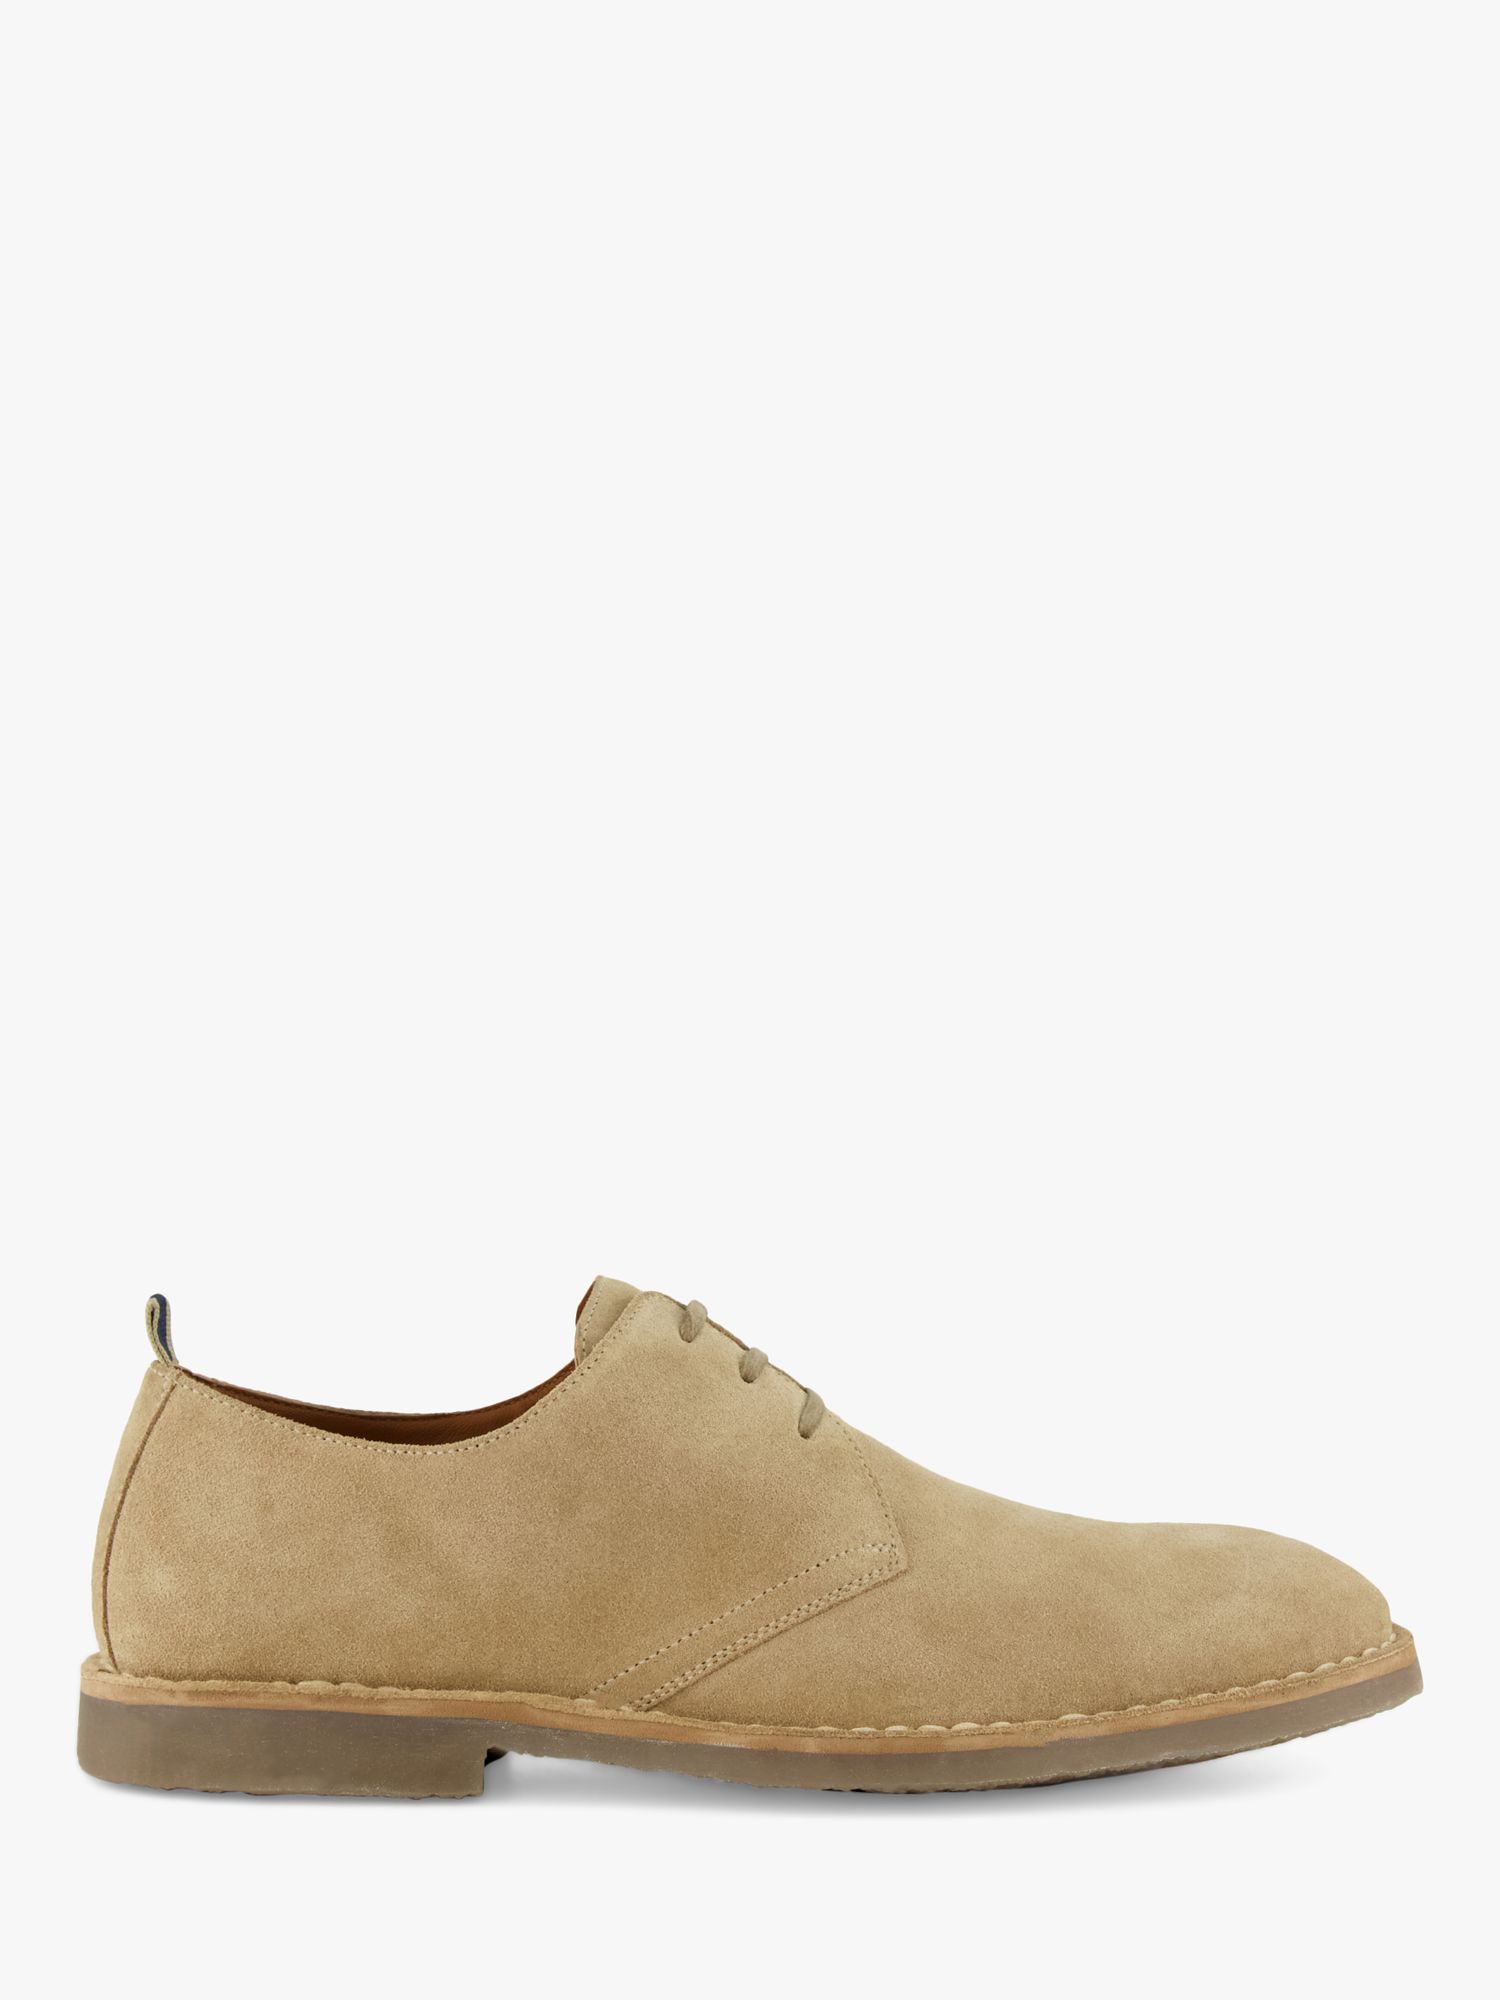 Dune Brooked Suede Chukka Shoes, Stone at John Lewis & Partners